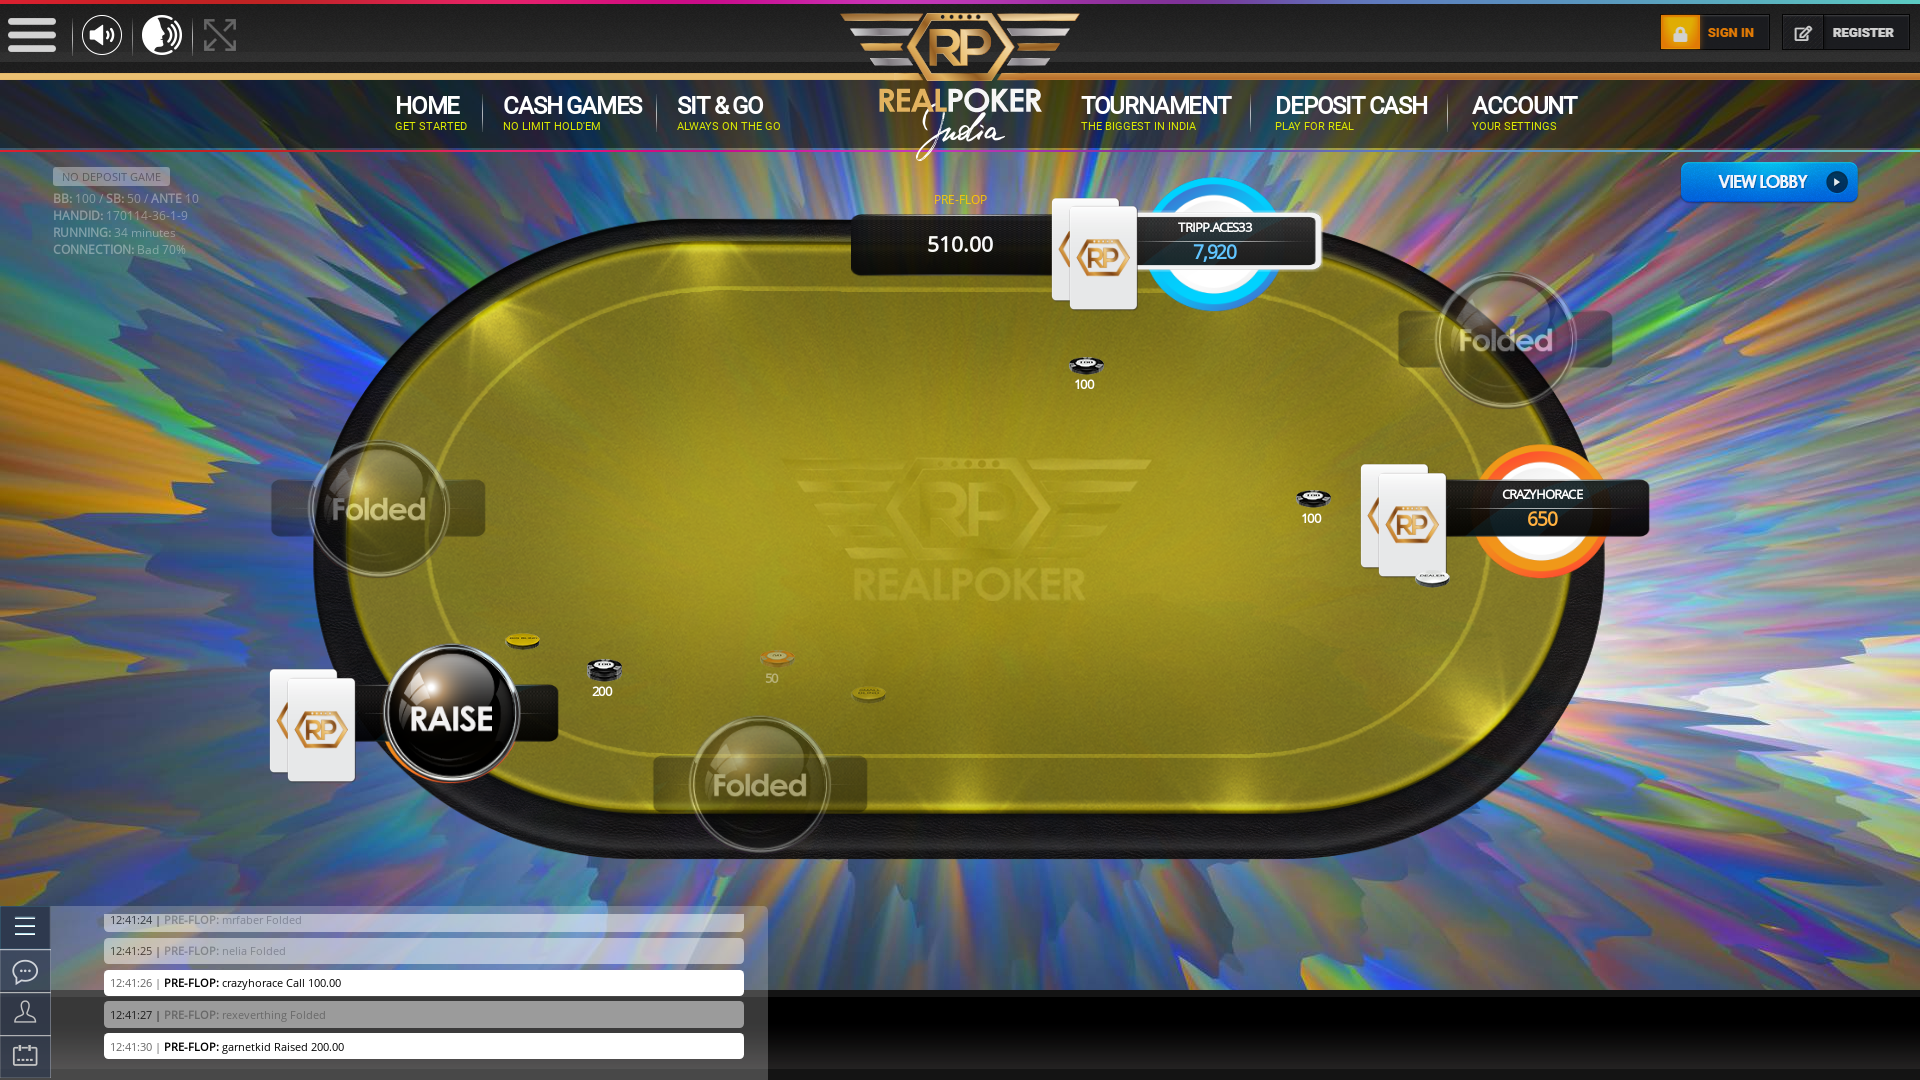 Mormugao Goa online poker game on a 10 player table in the 33rd minute of the game